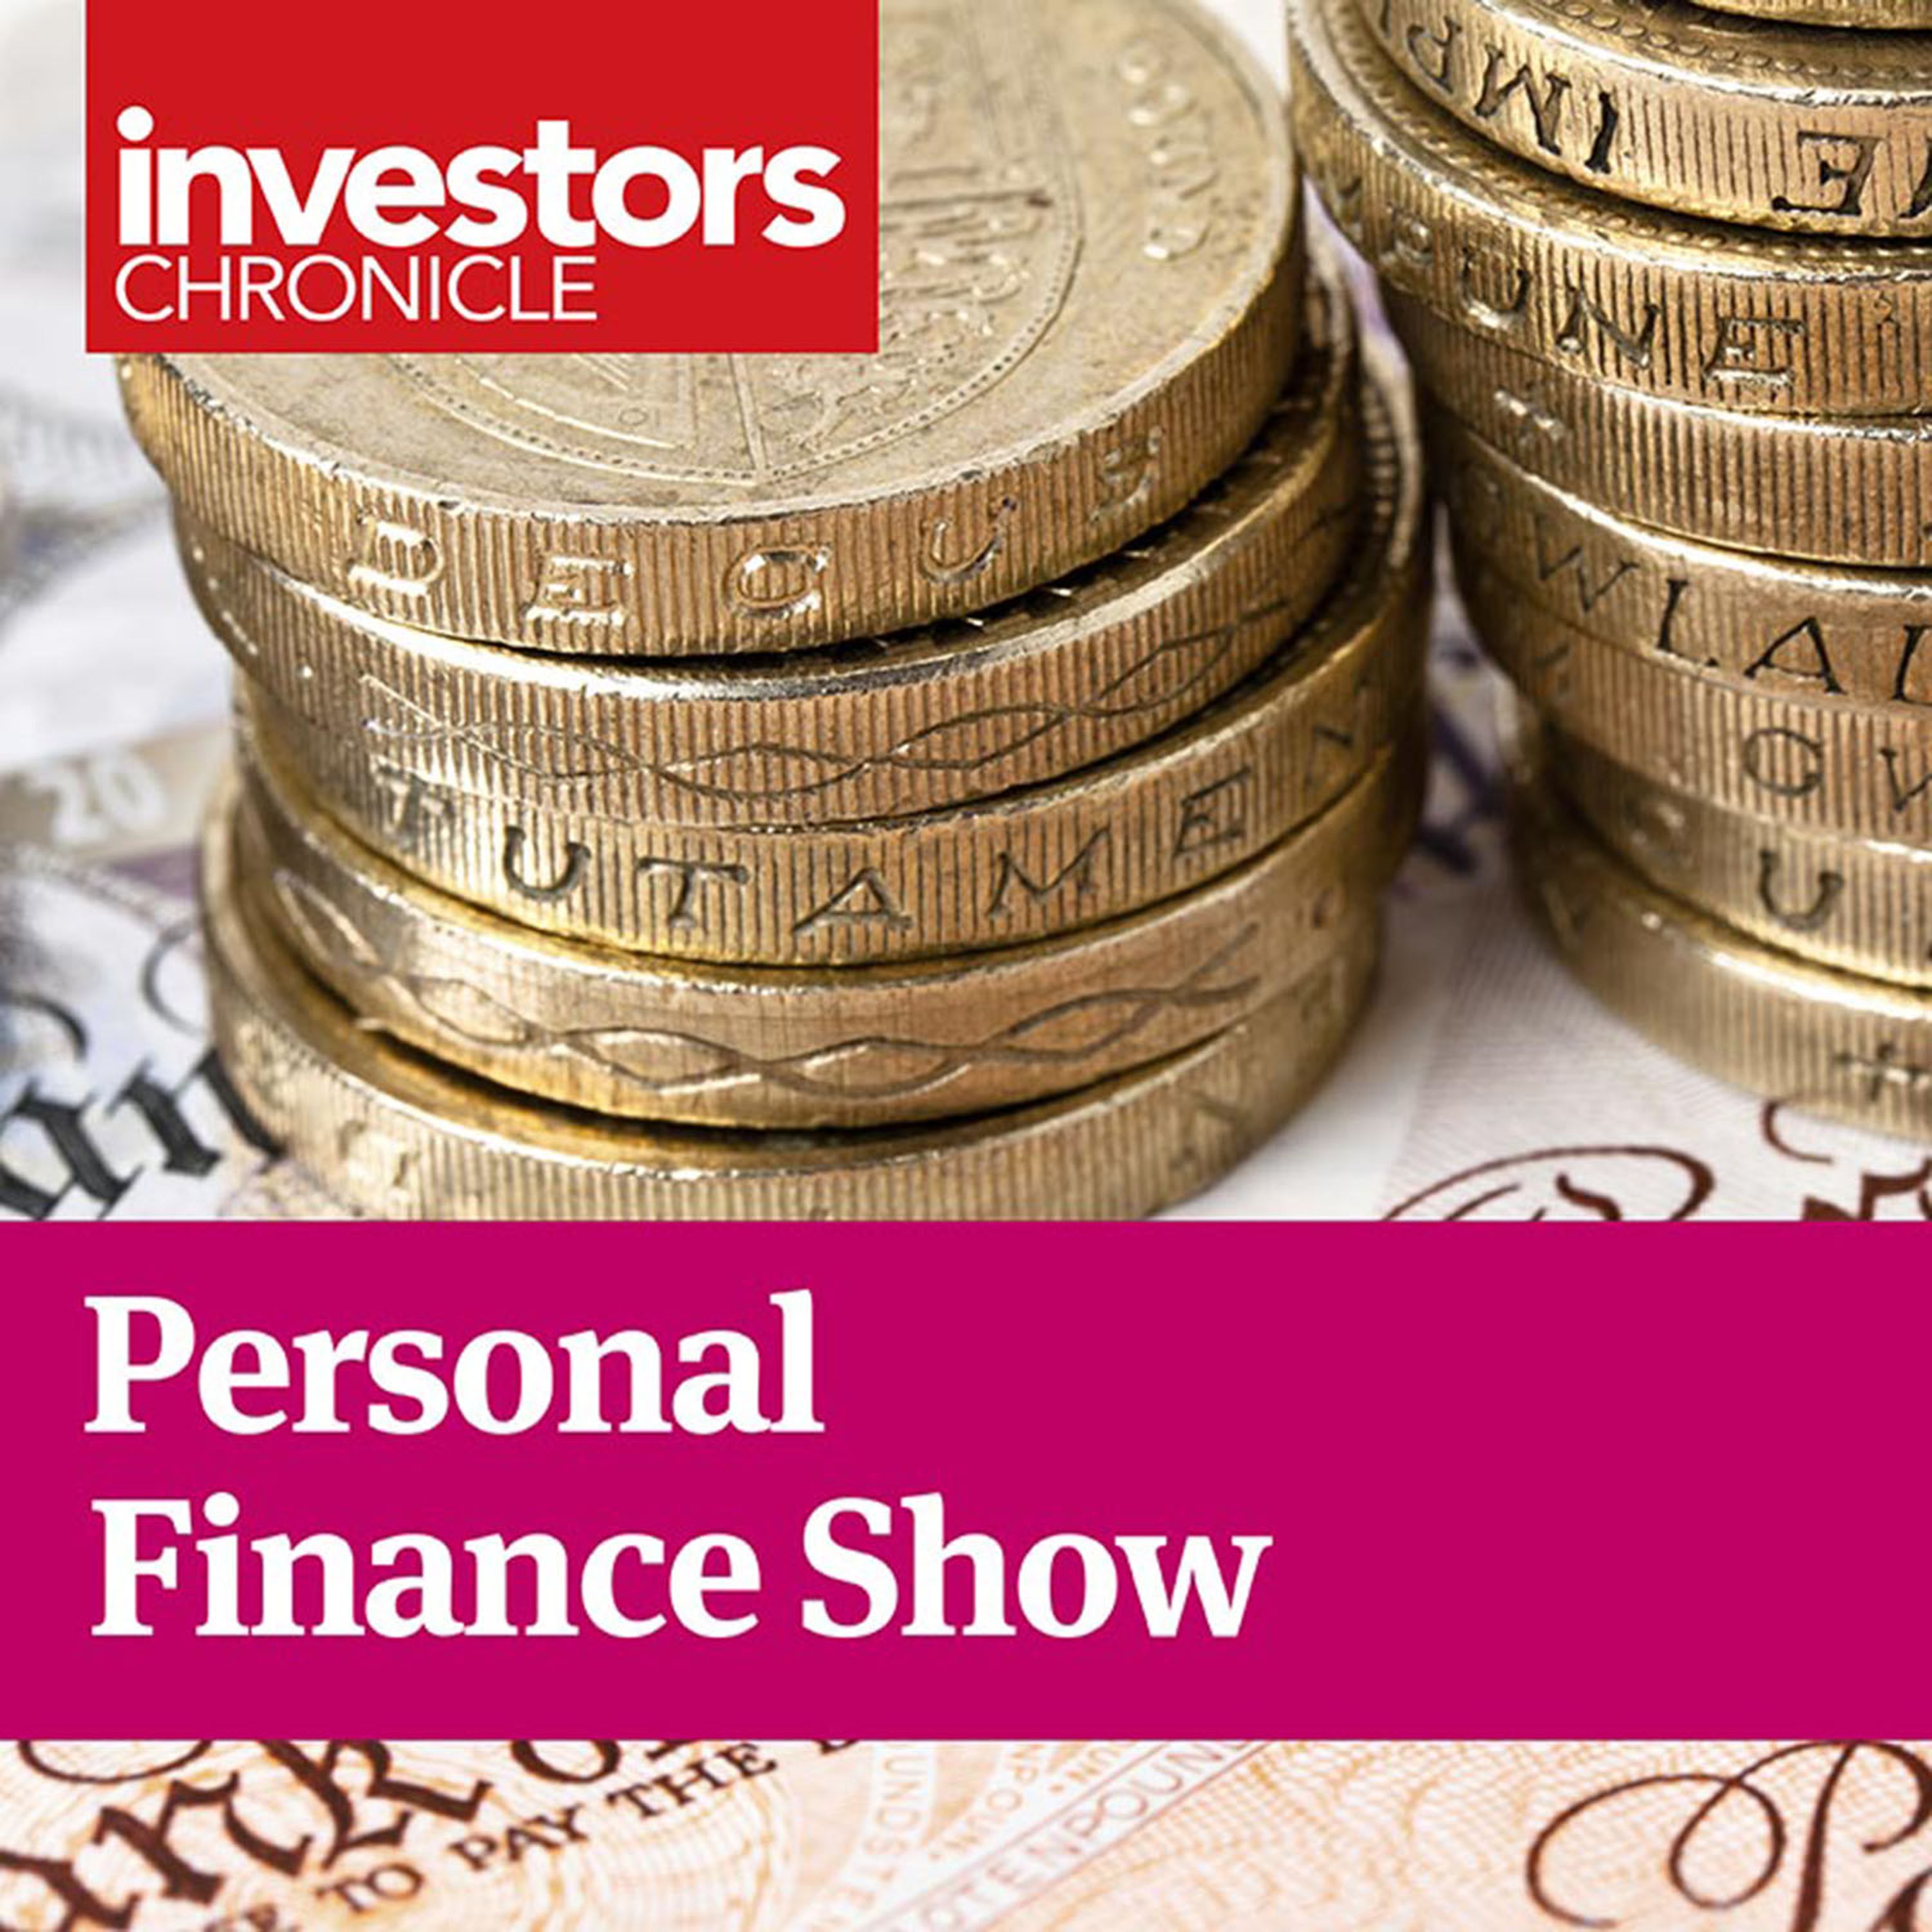 Personal Finance Show: Investment trust benefits & Murray International income